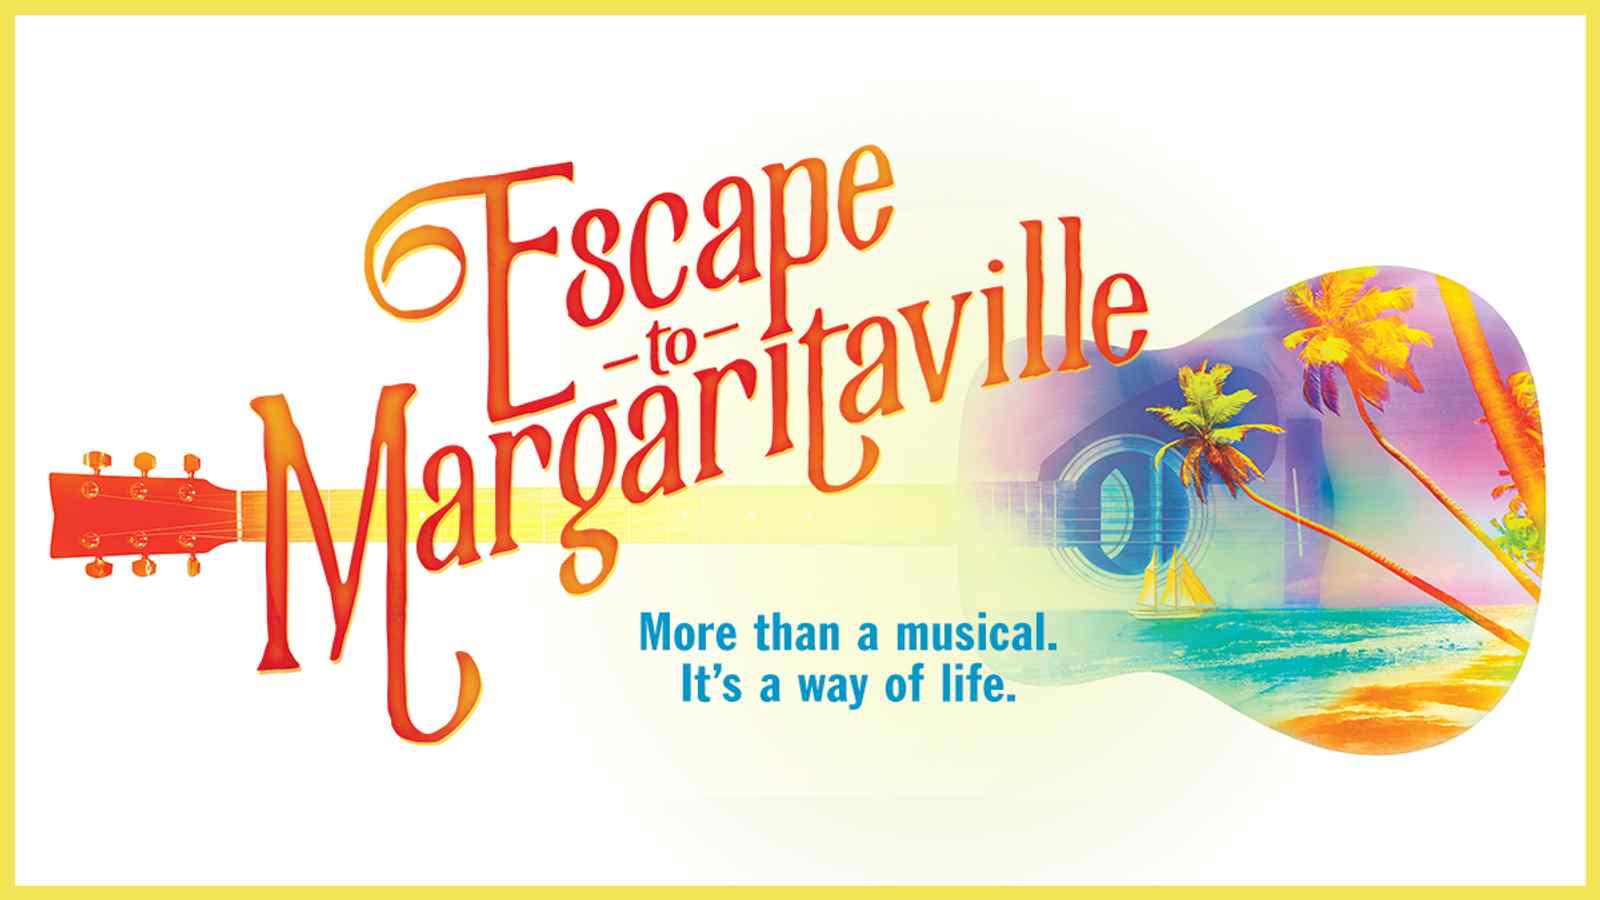 Q&A: Jimmy Buffett brings ‘Escape to Margaritaville’ to National Theatre